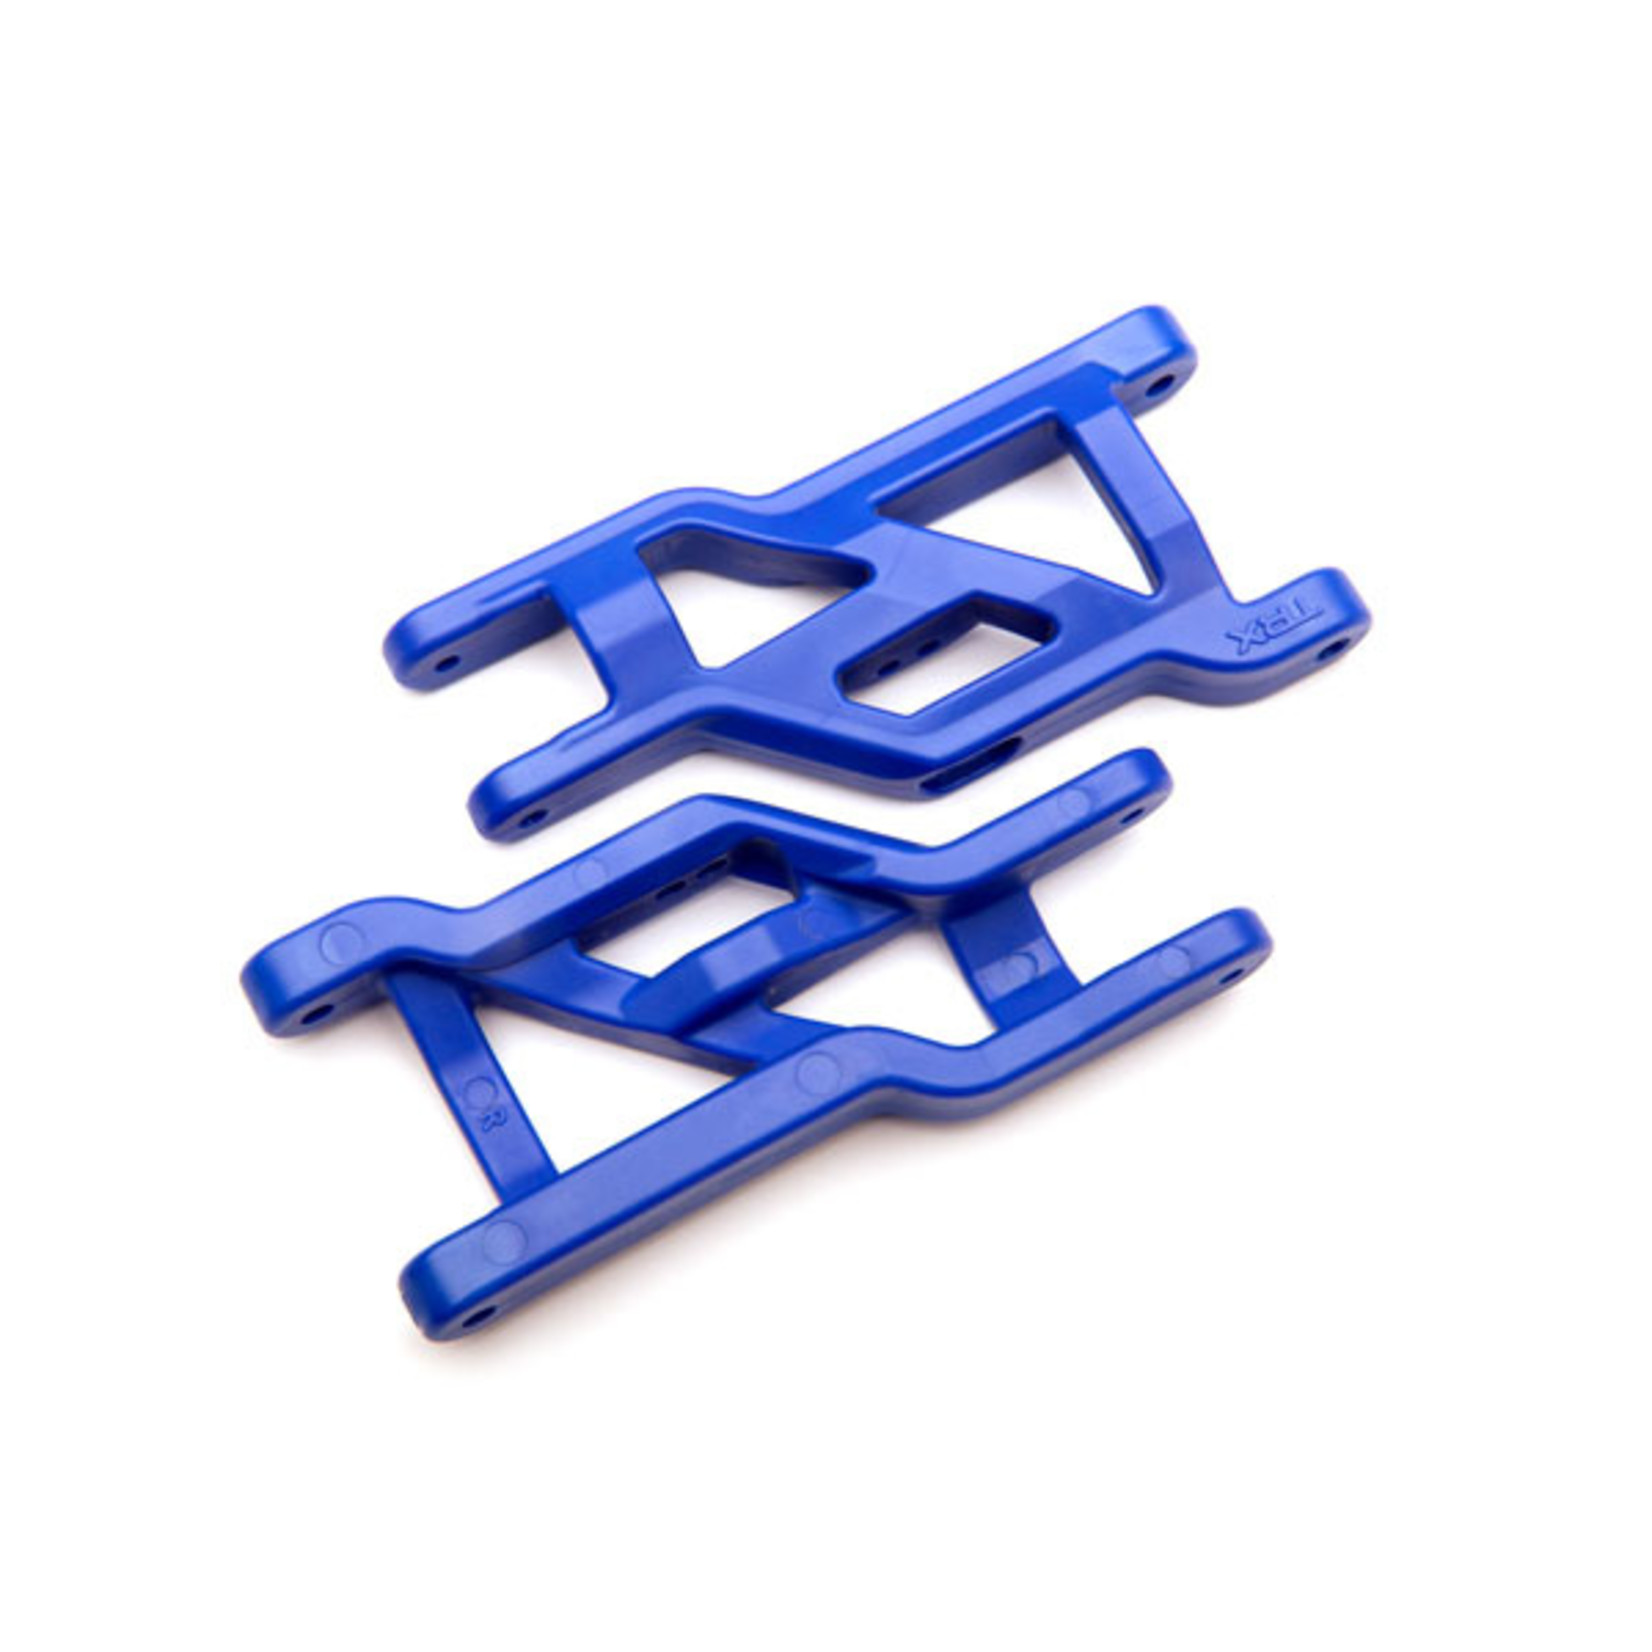 Traxxas 3631A - Suspension arms, blue, front, heavy duty (